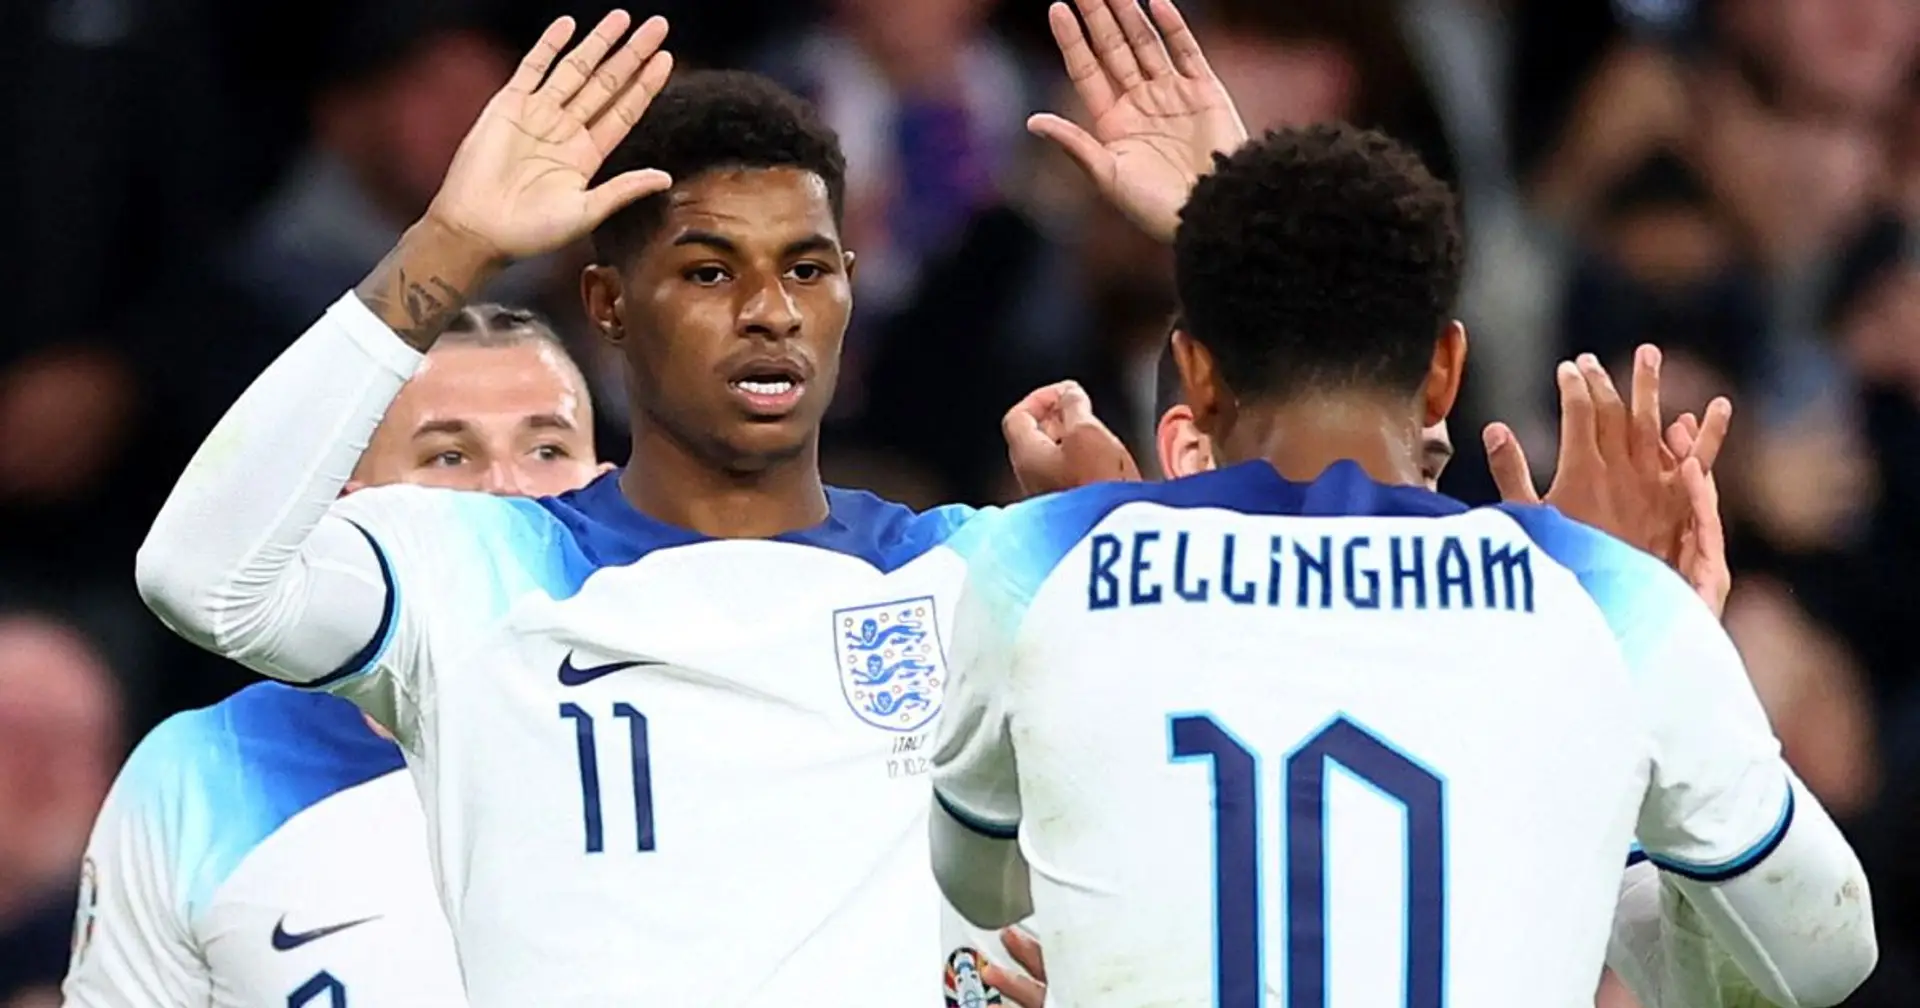 Rashford ready to 'kick on' after England goal & 3 more under-radar stories at Man United today